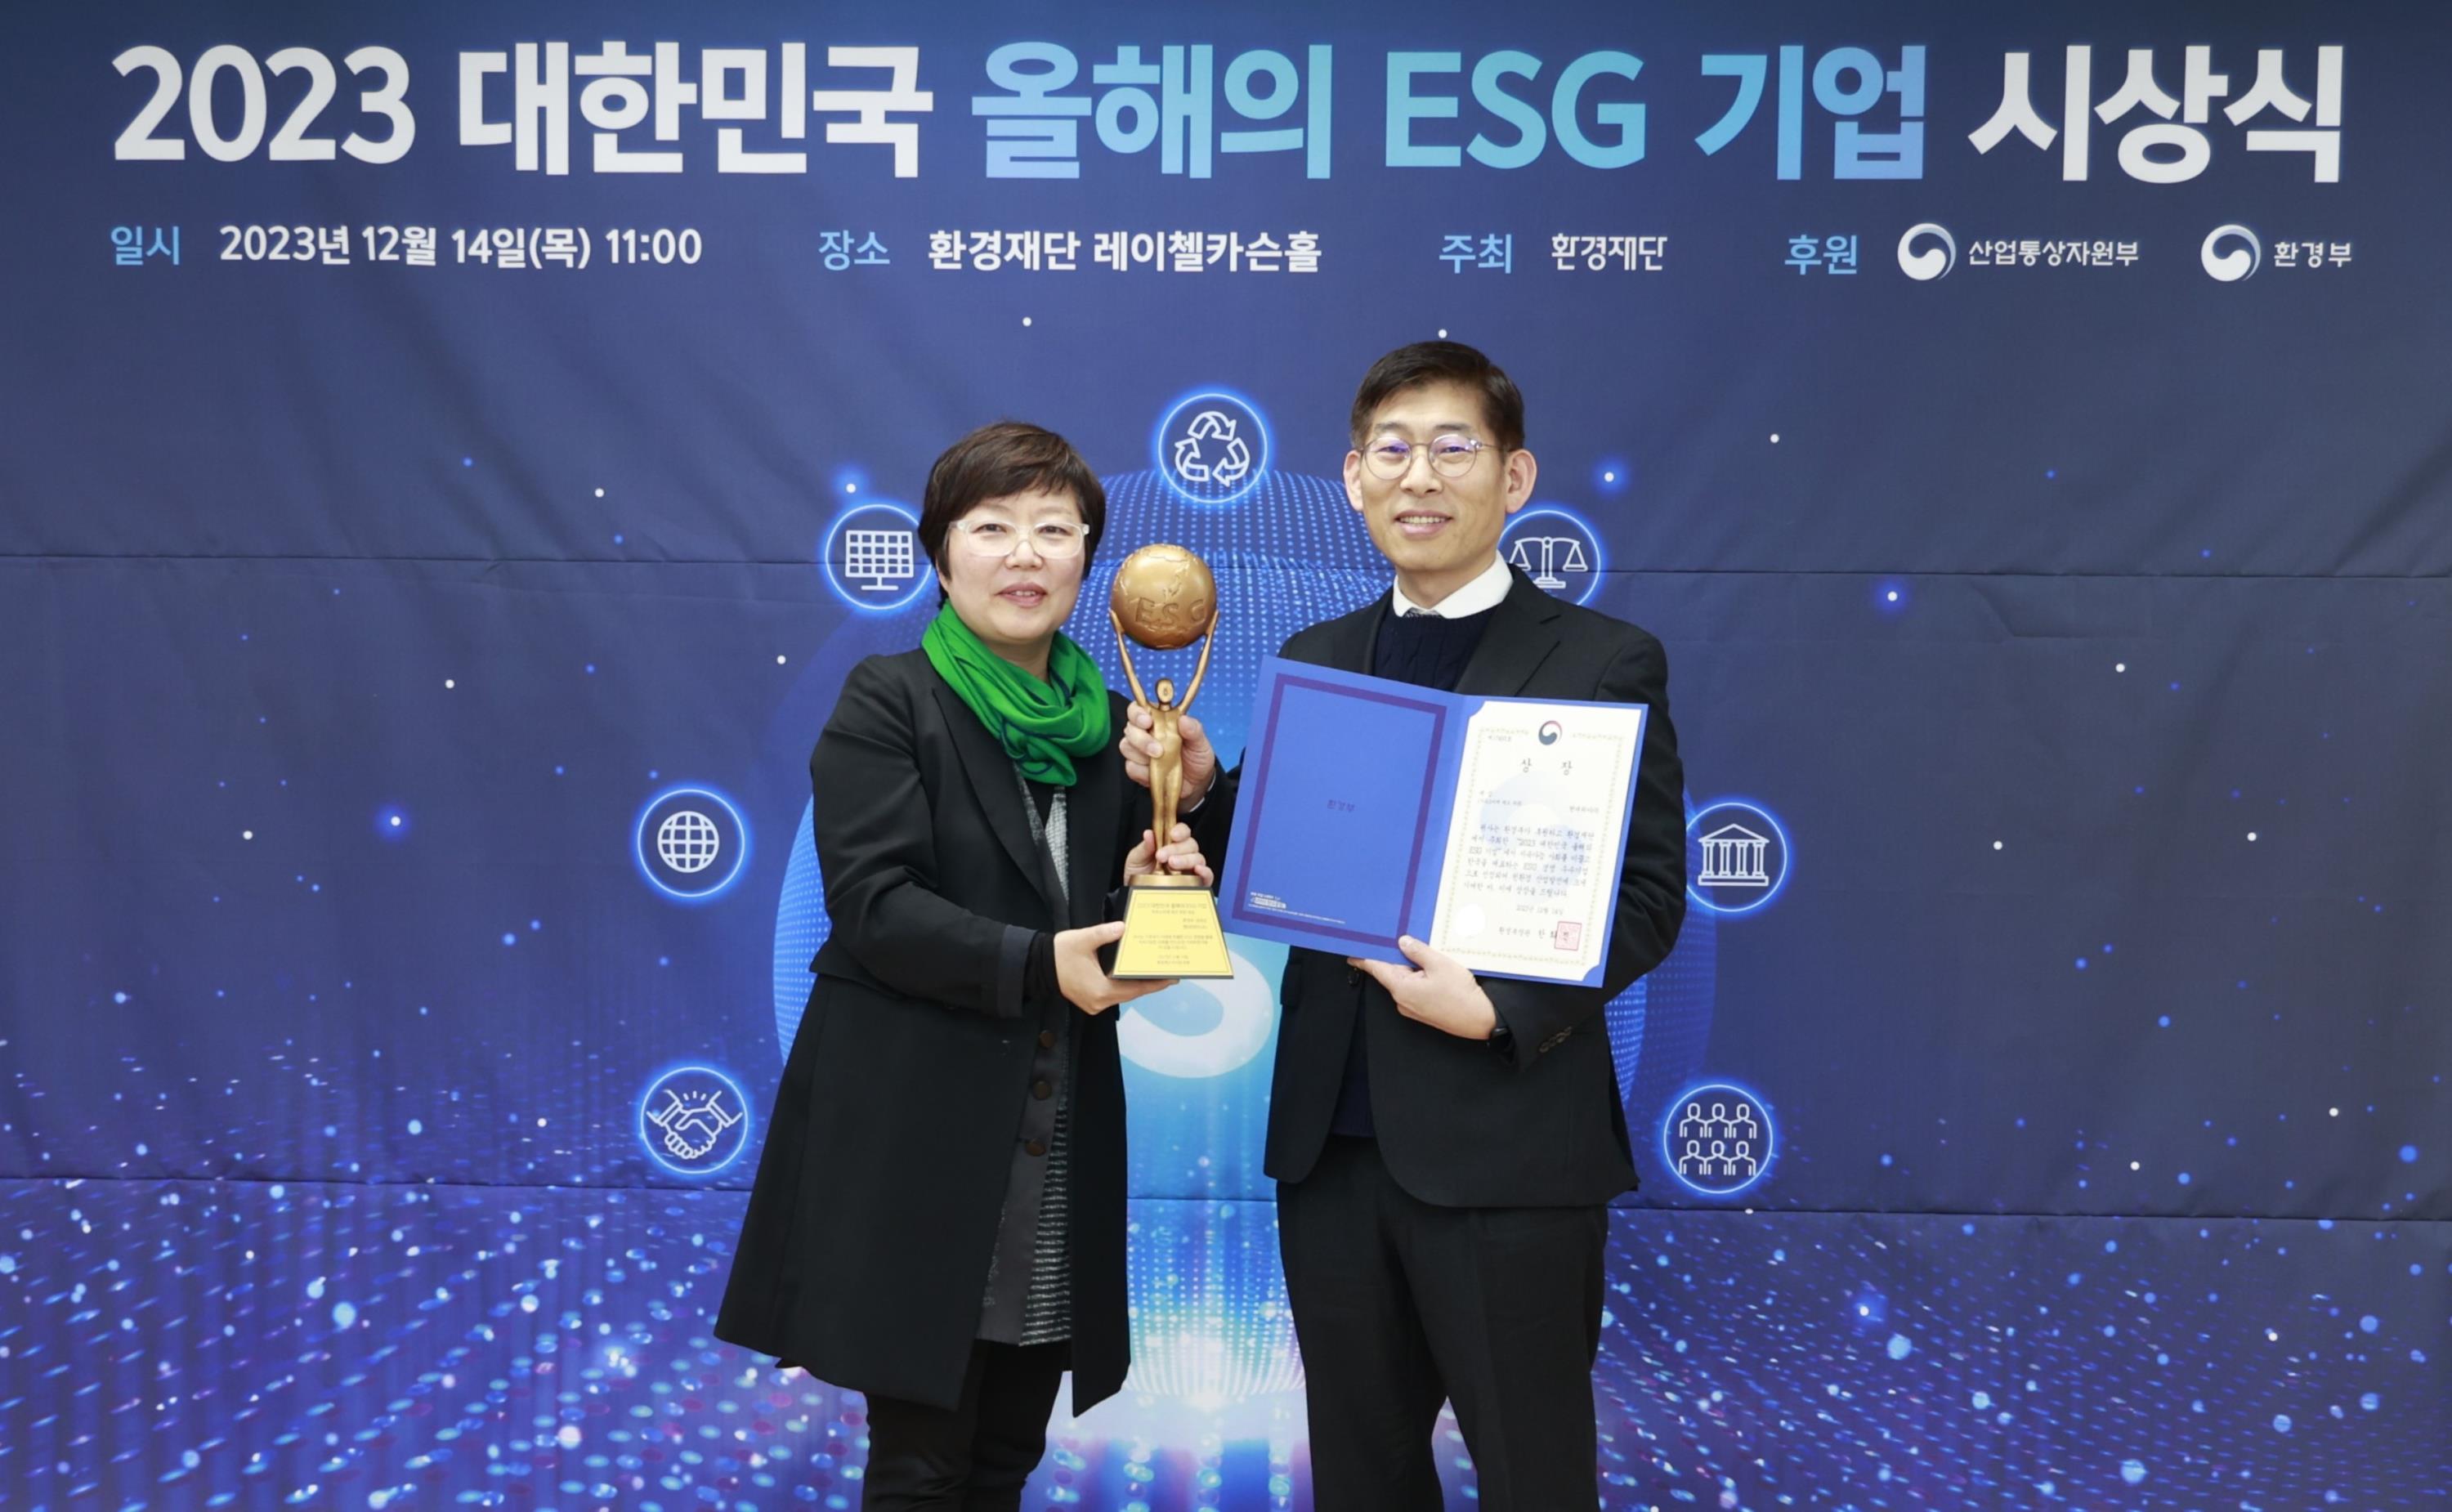 On December 14th, Vice President of HYUNDAI WIA, Jungwook Lee (right) and the CEO of Korea Green Foundation are taking photo to celebrate winning the ‘Minister of Environment Award’ at the ‘2023 Korea Award Ceremony of ESG Company of the Year’ held at the Environment Foundation in Jung-gu, Seoul. Courtesy of HYUNDAI WIA.